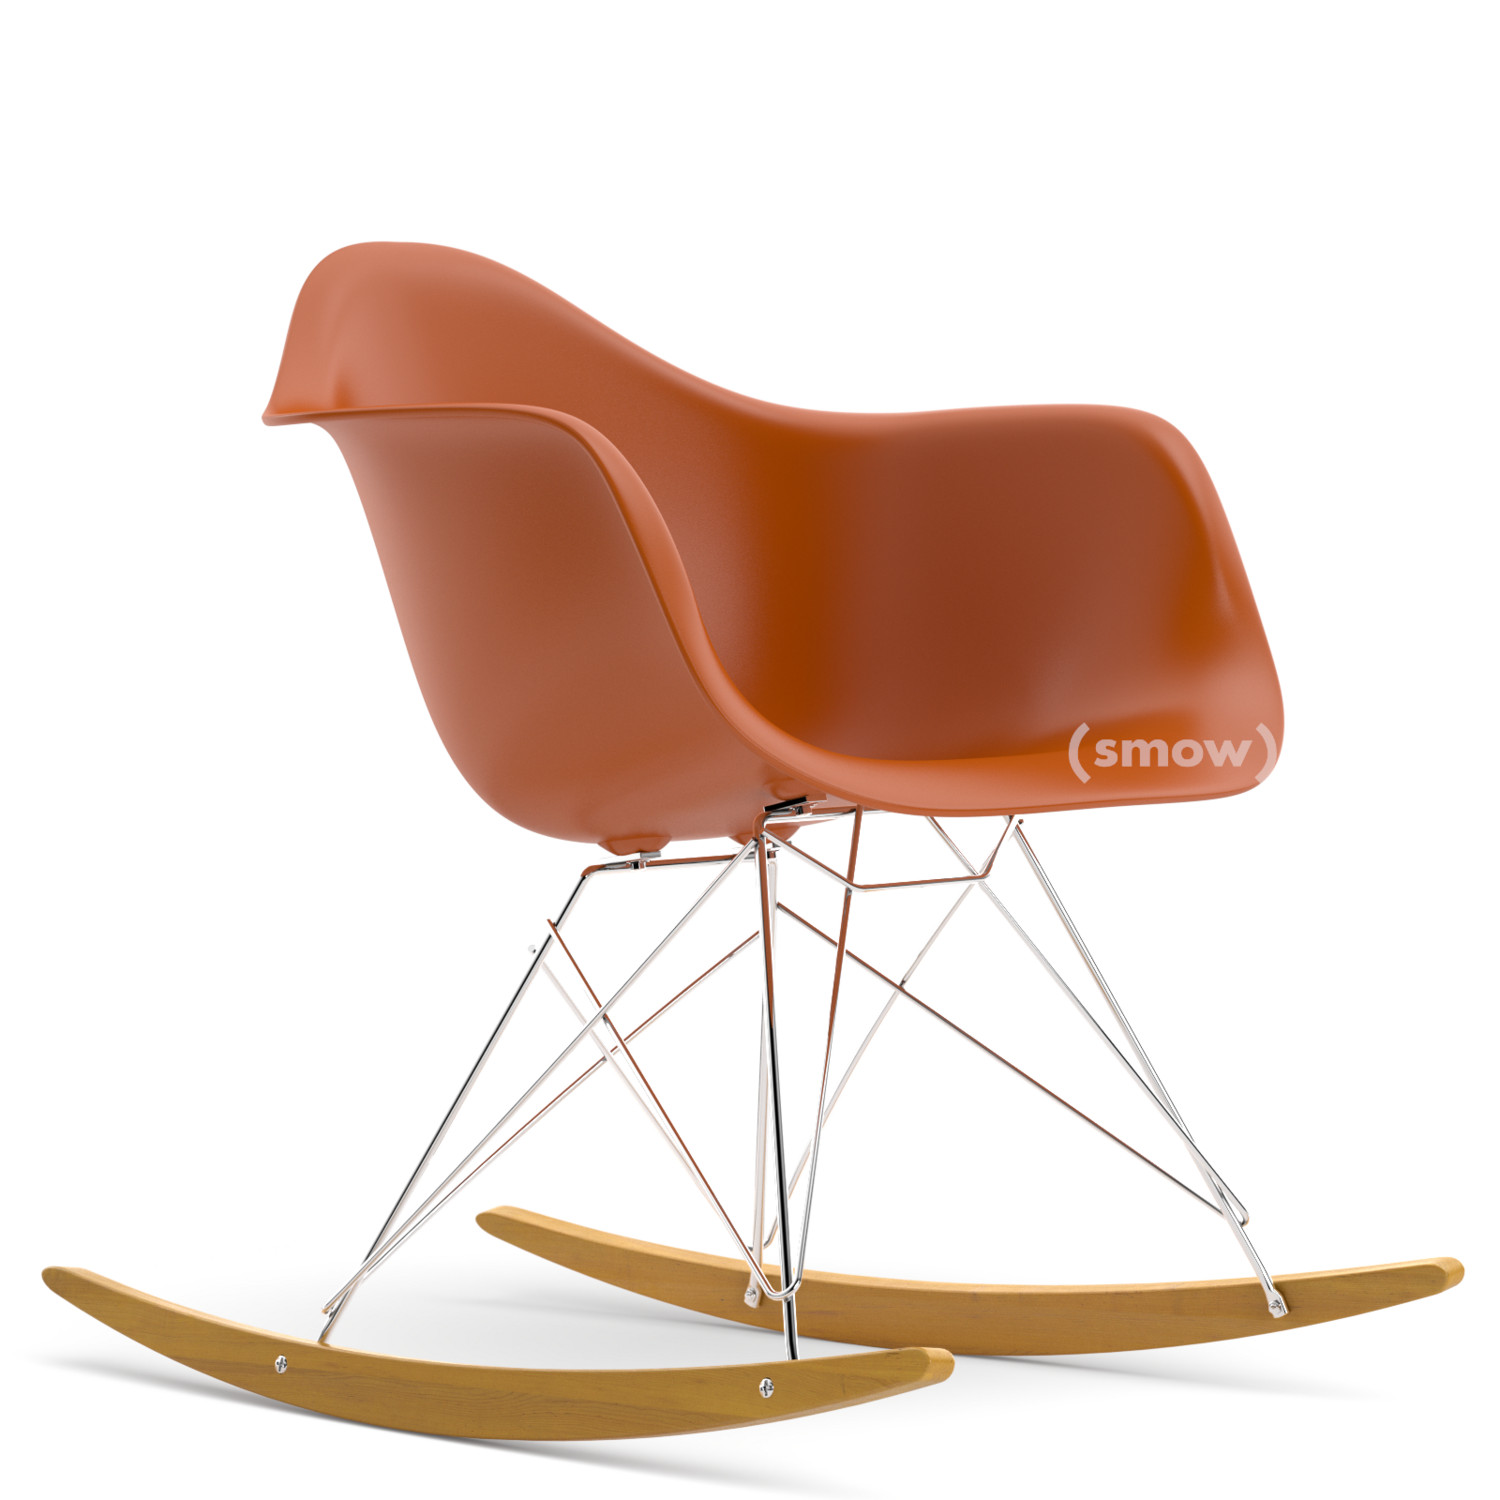 Vitra Eames Plastic Armchair Rar Rusty Orange New Height Chrome Plated Yellowish Maple By Charles Ray Eames 1950 Designer Furniture By Smow Com